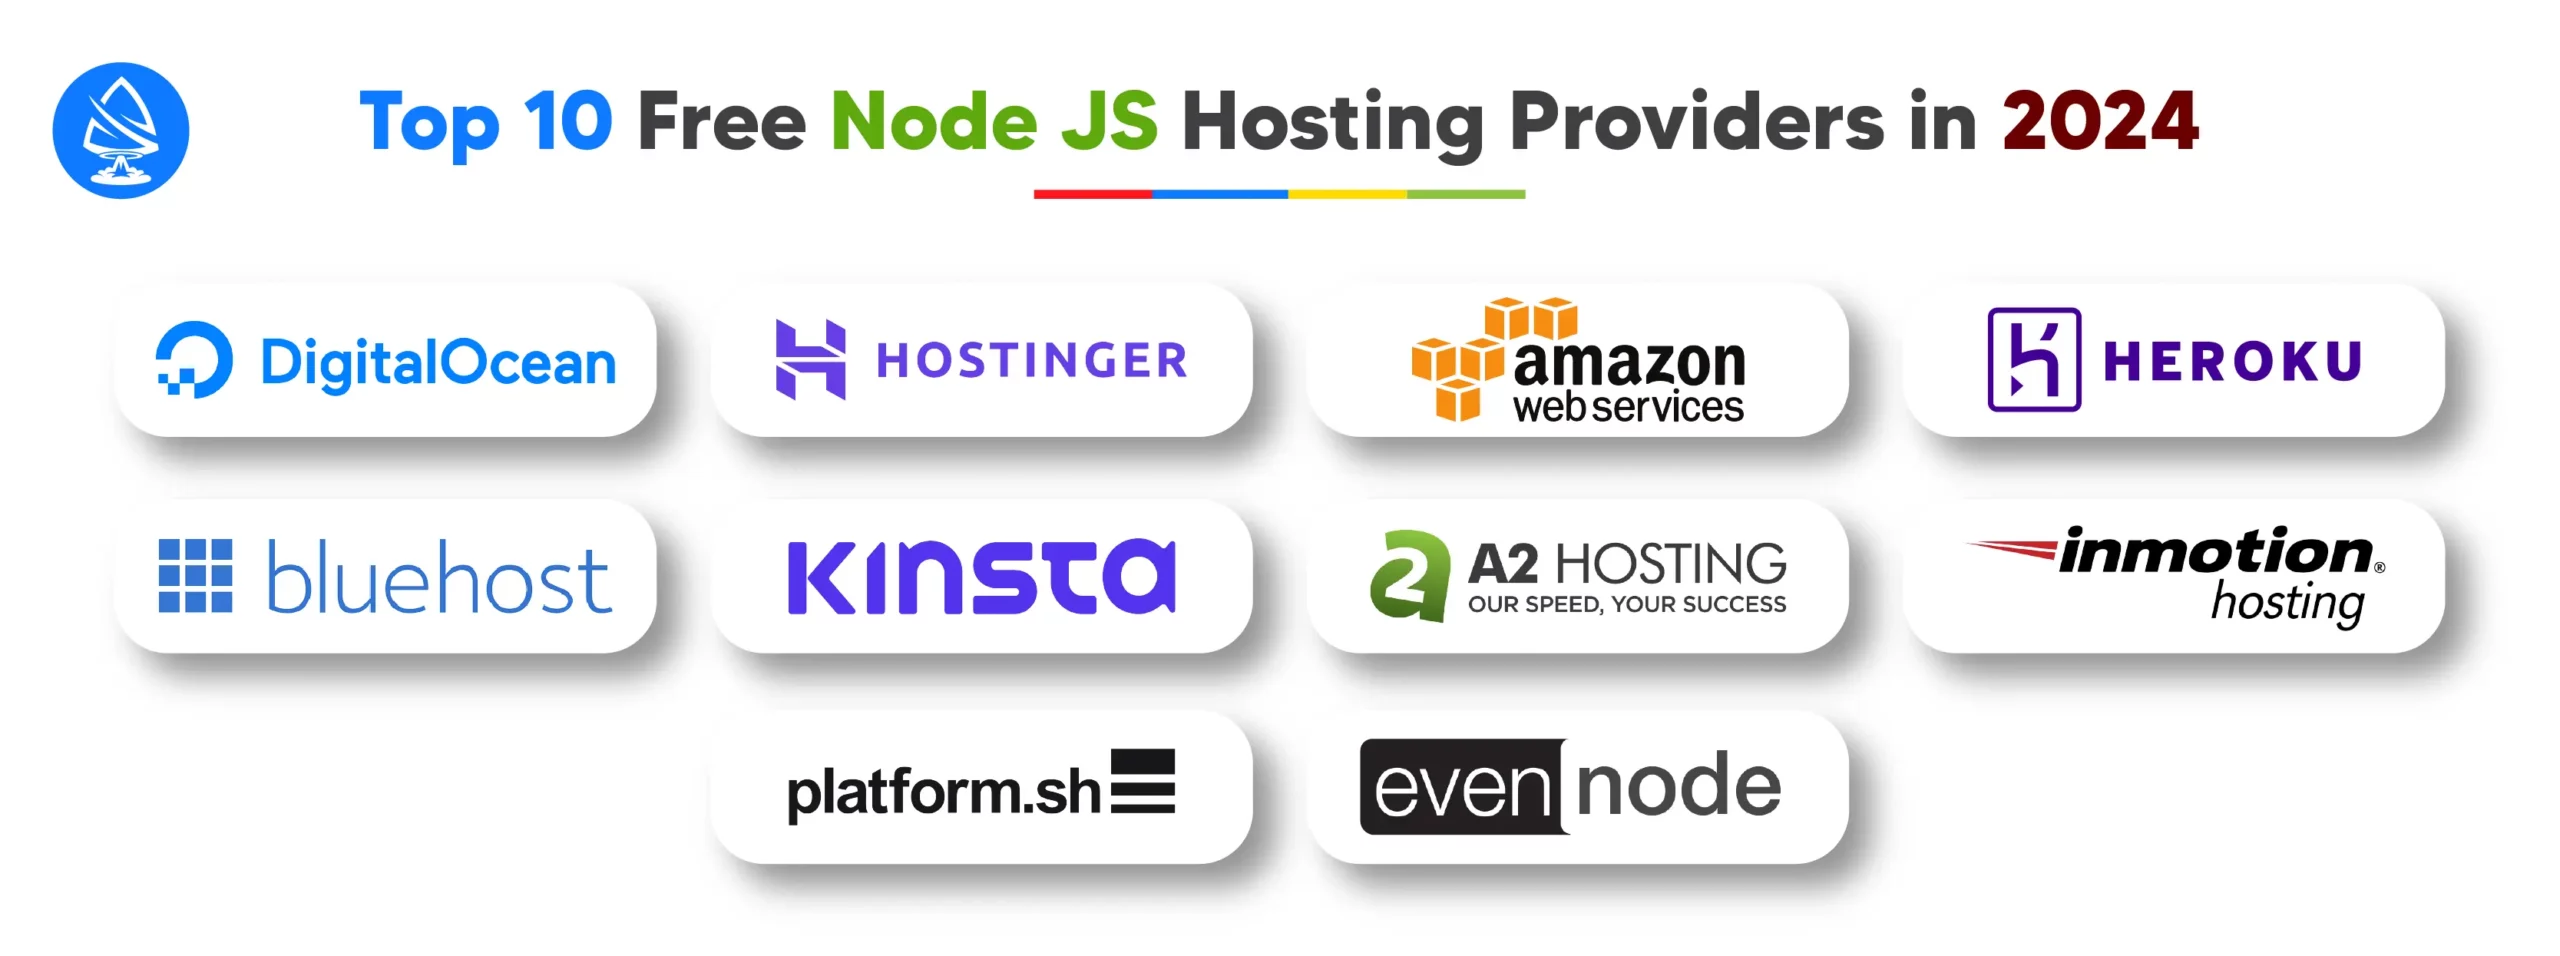 Top 10 Free Node JS Hosting Providers in 2024 